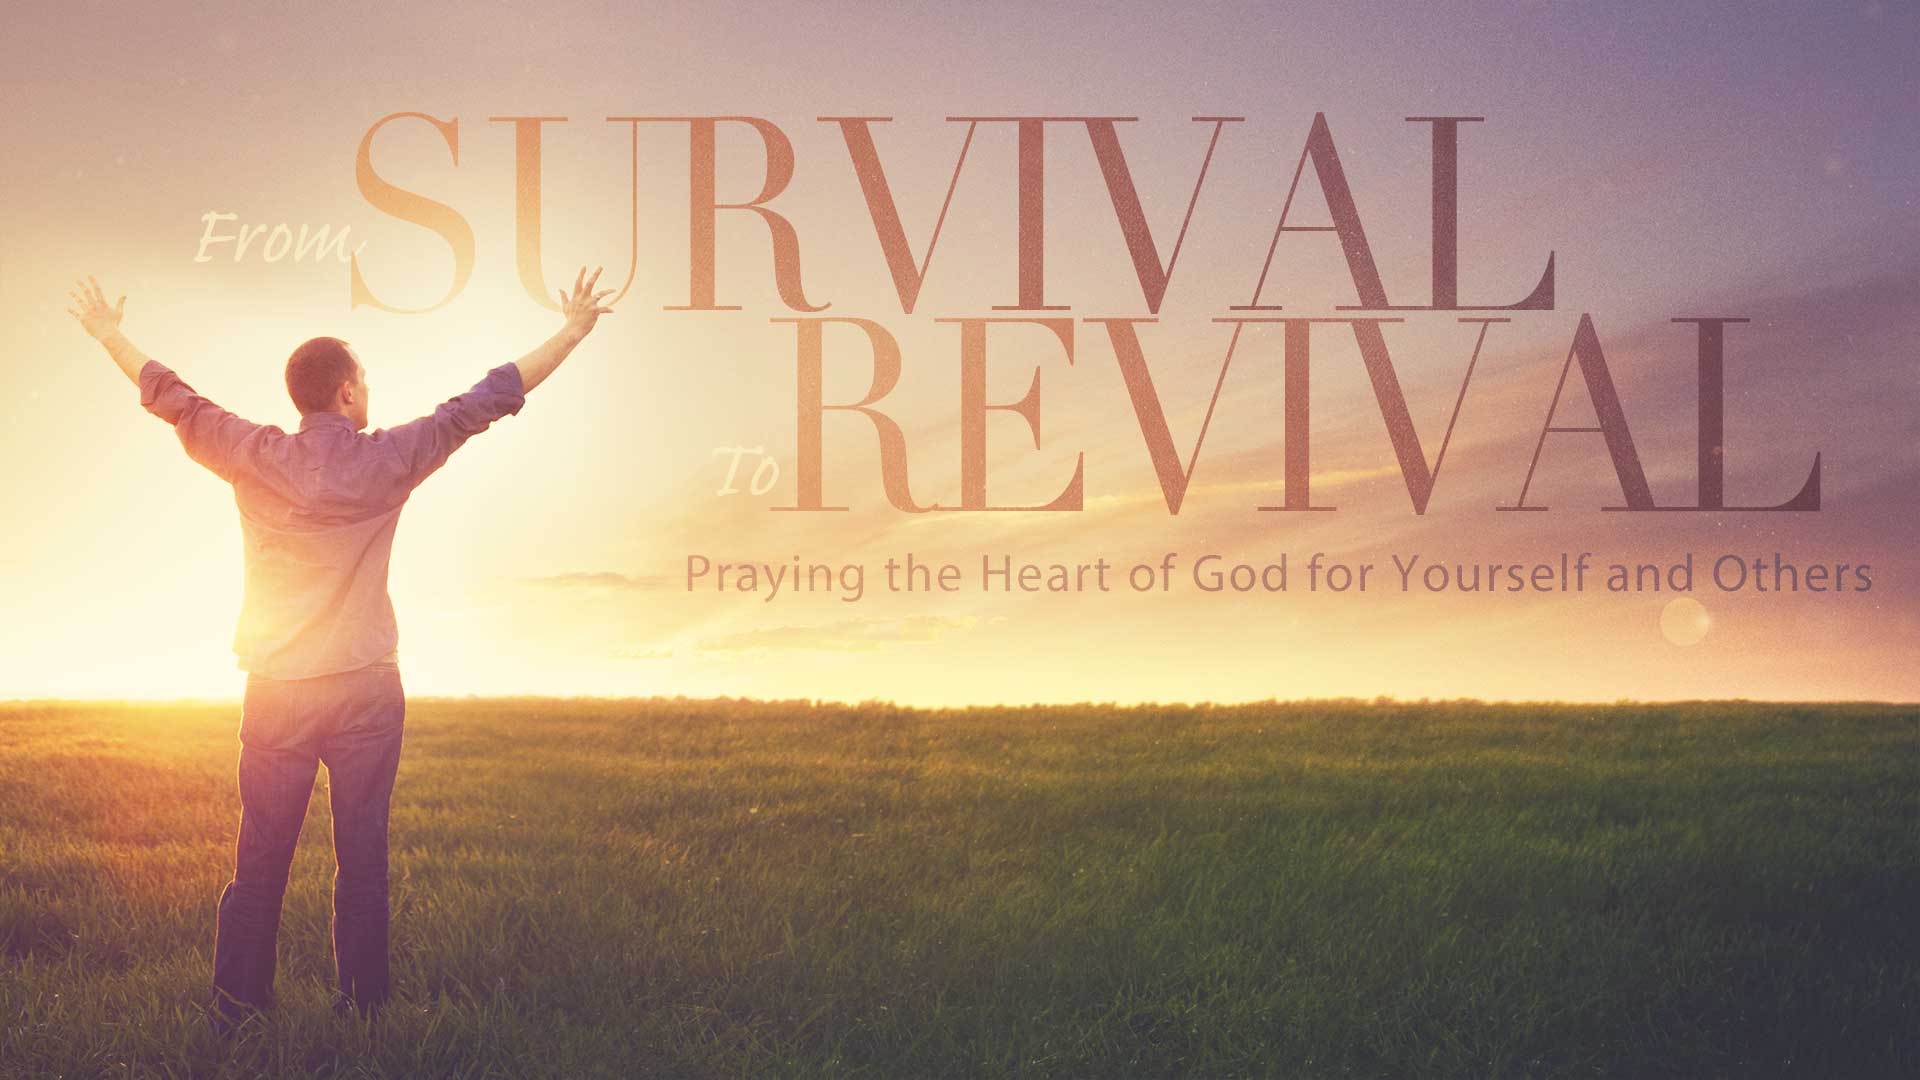 From Survival To Revival: Week 10 Image